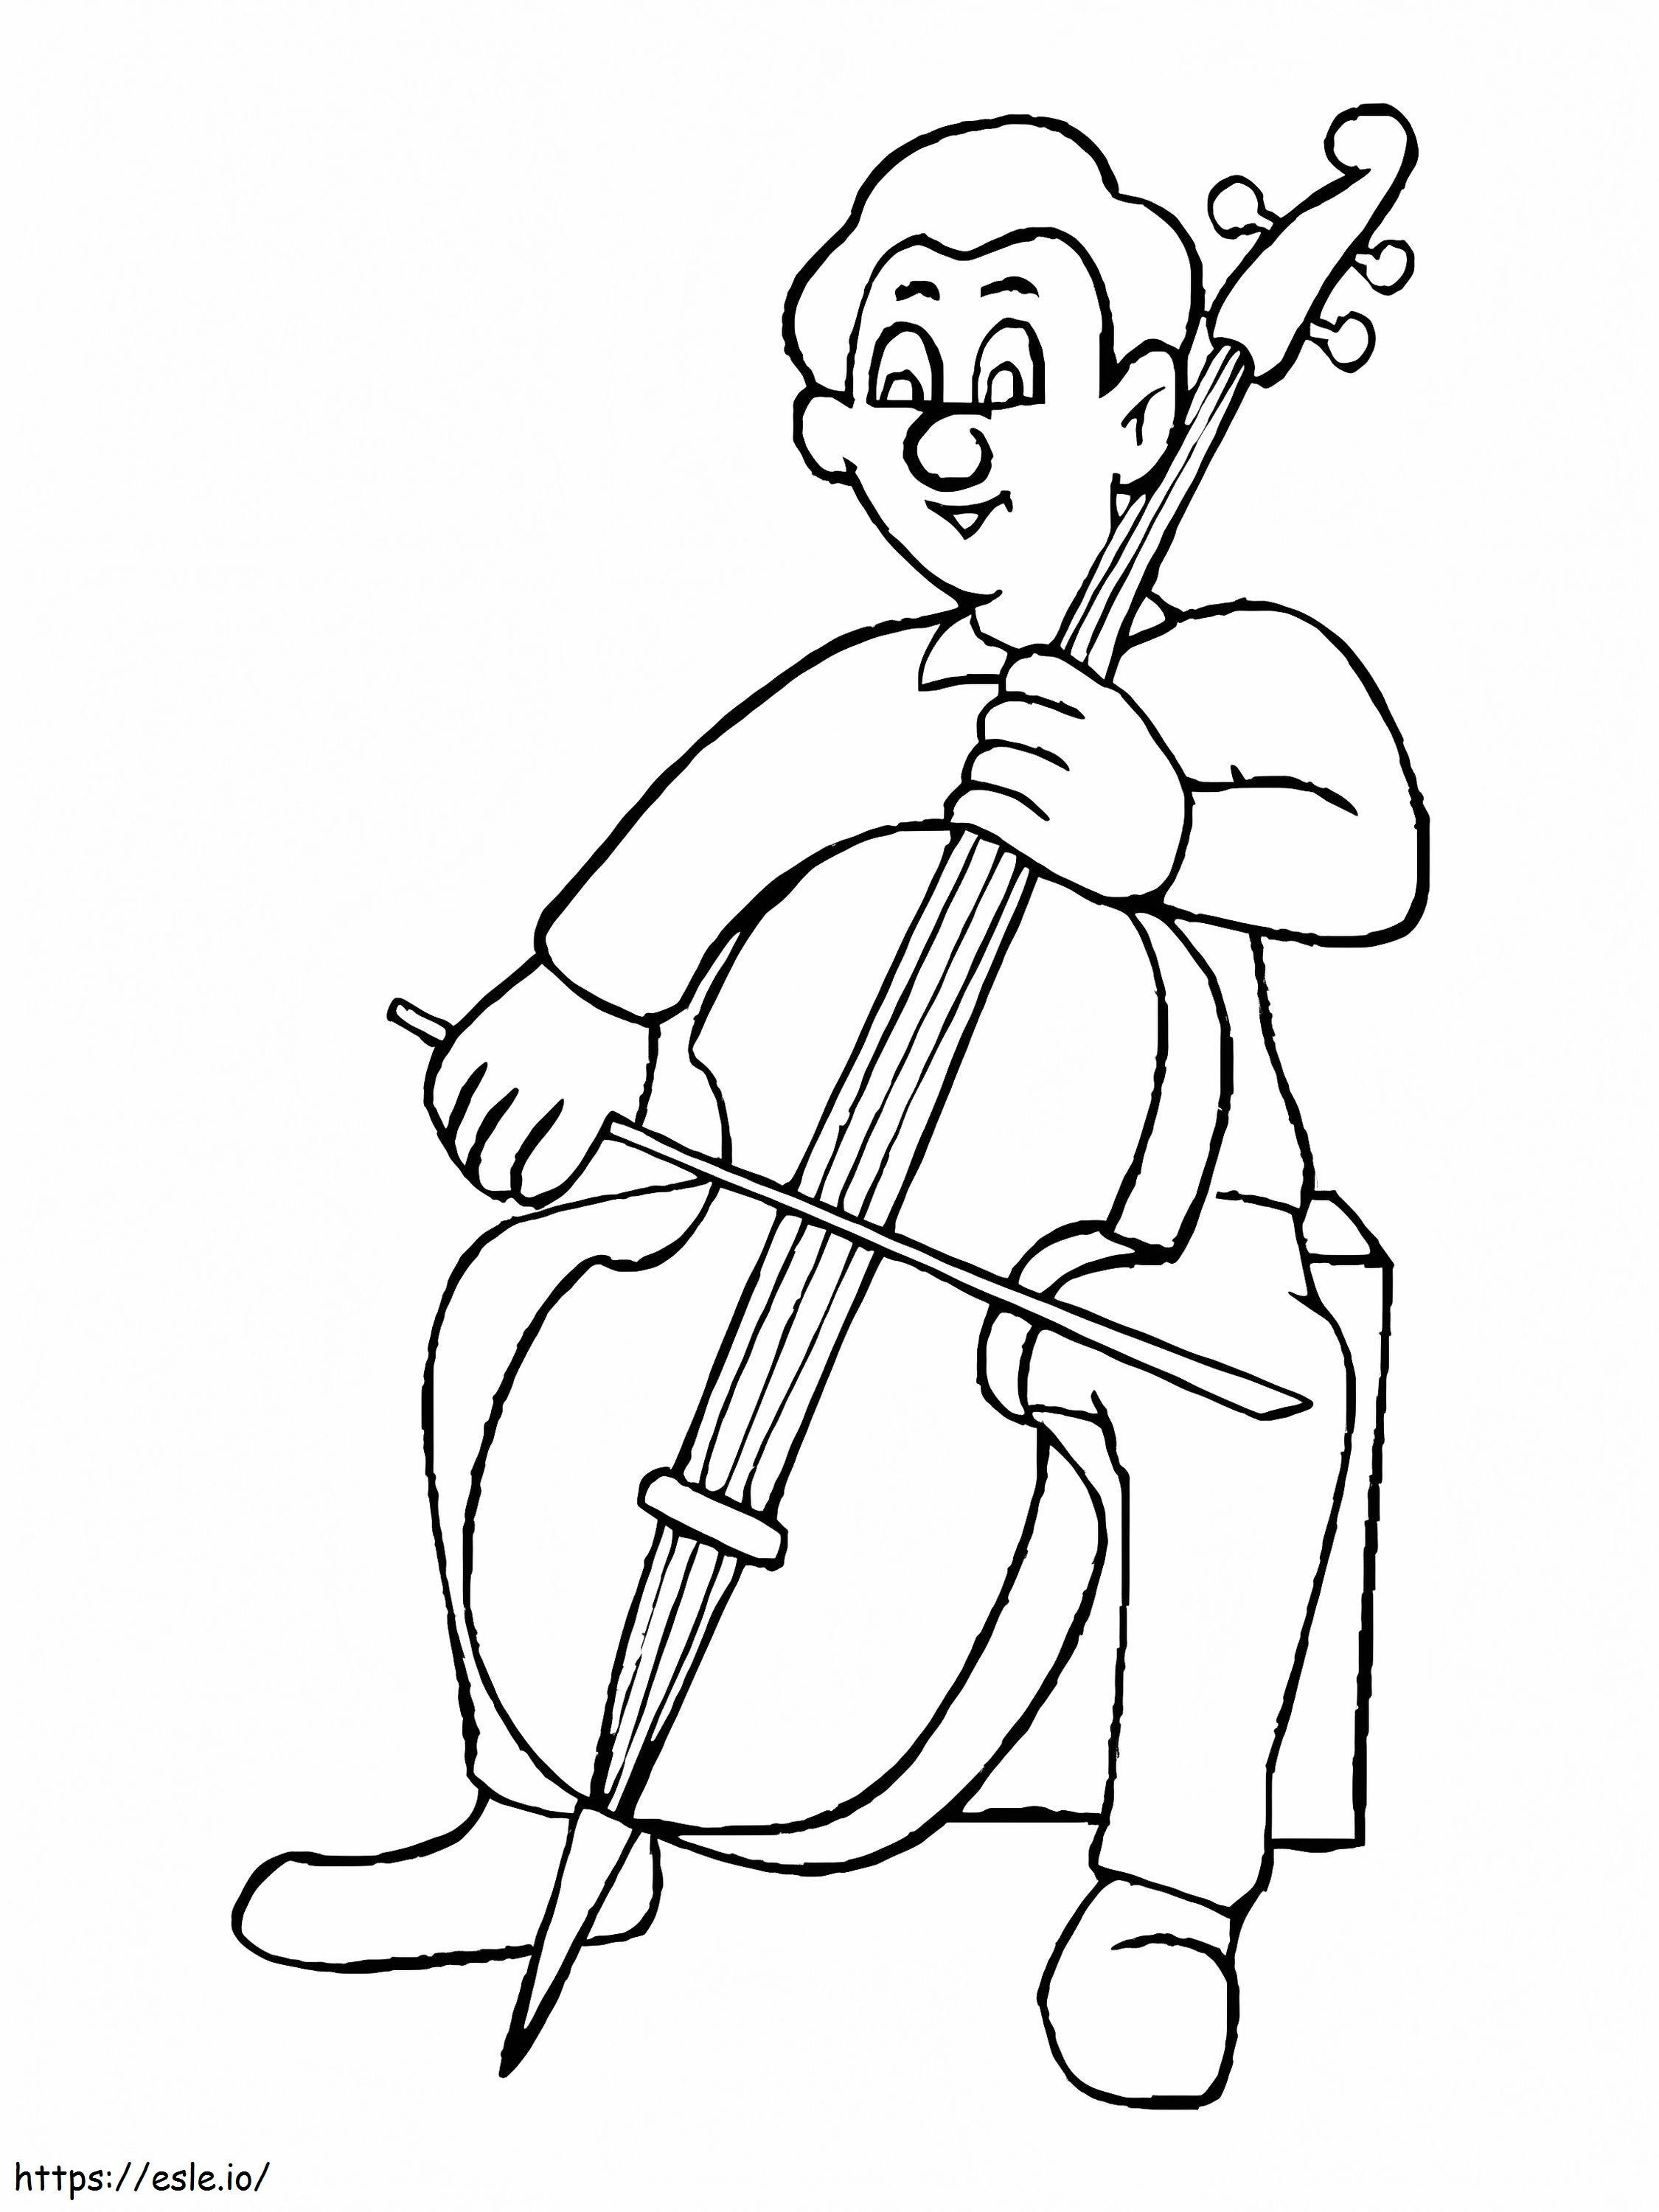 Man Playing Cello coloring page